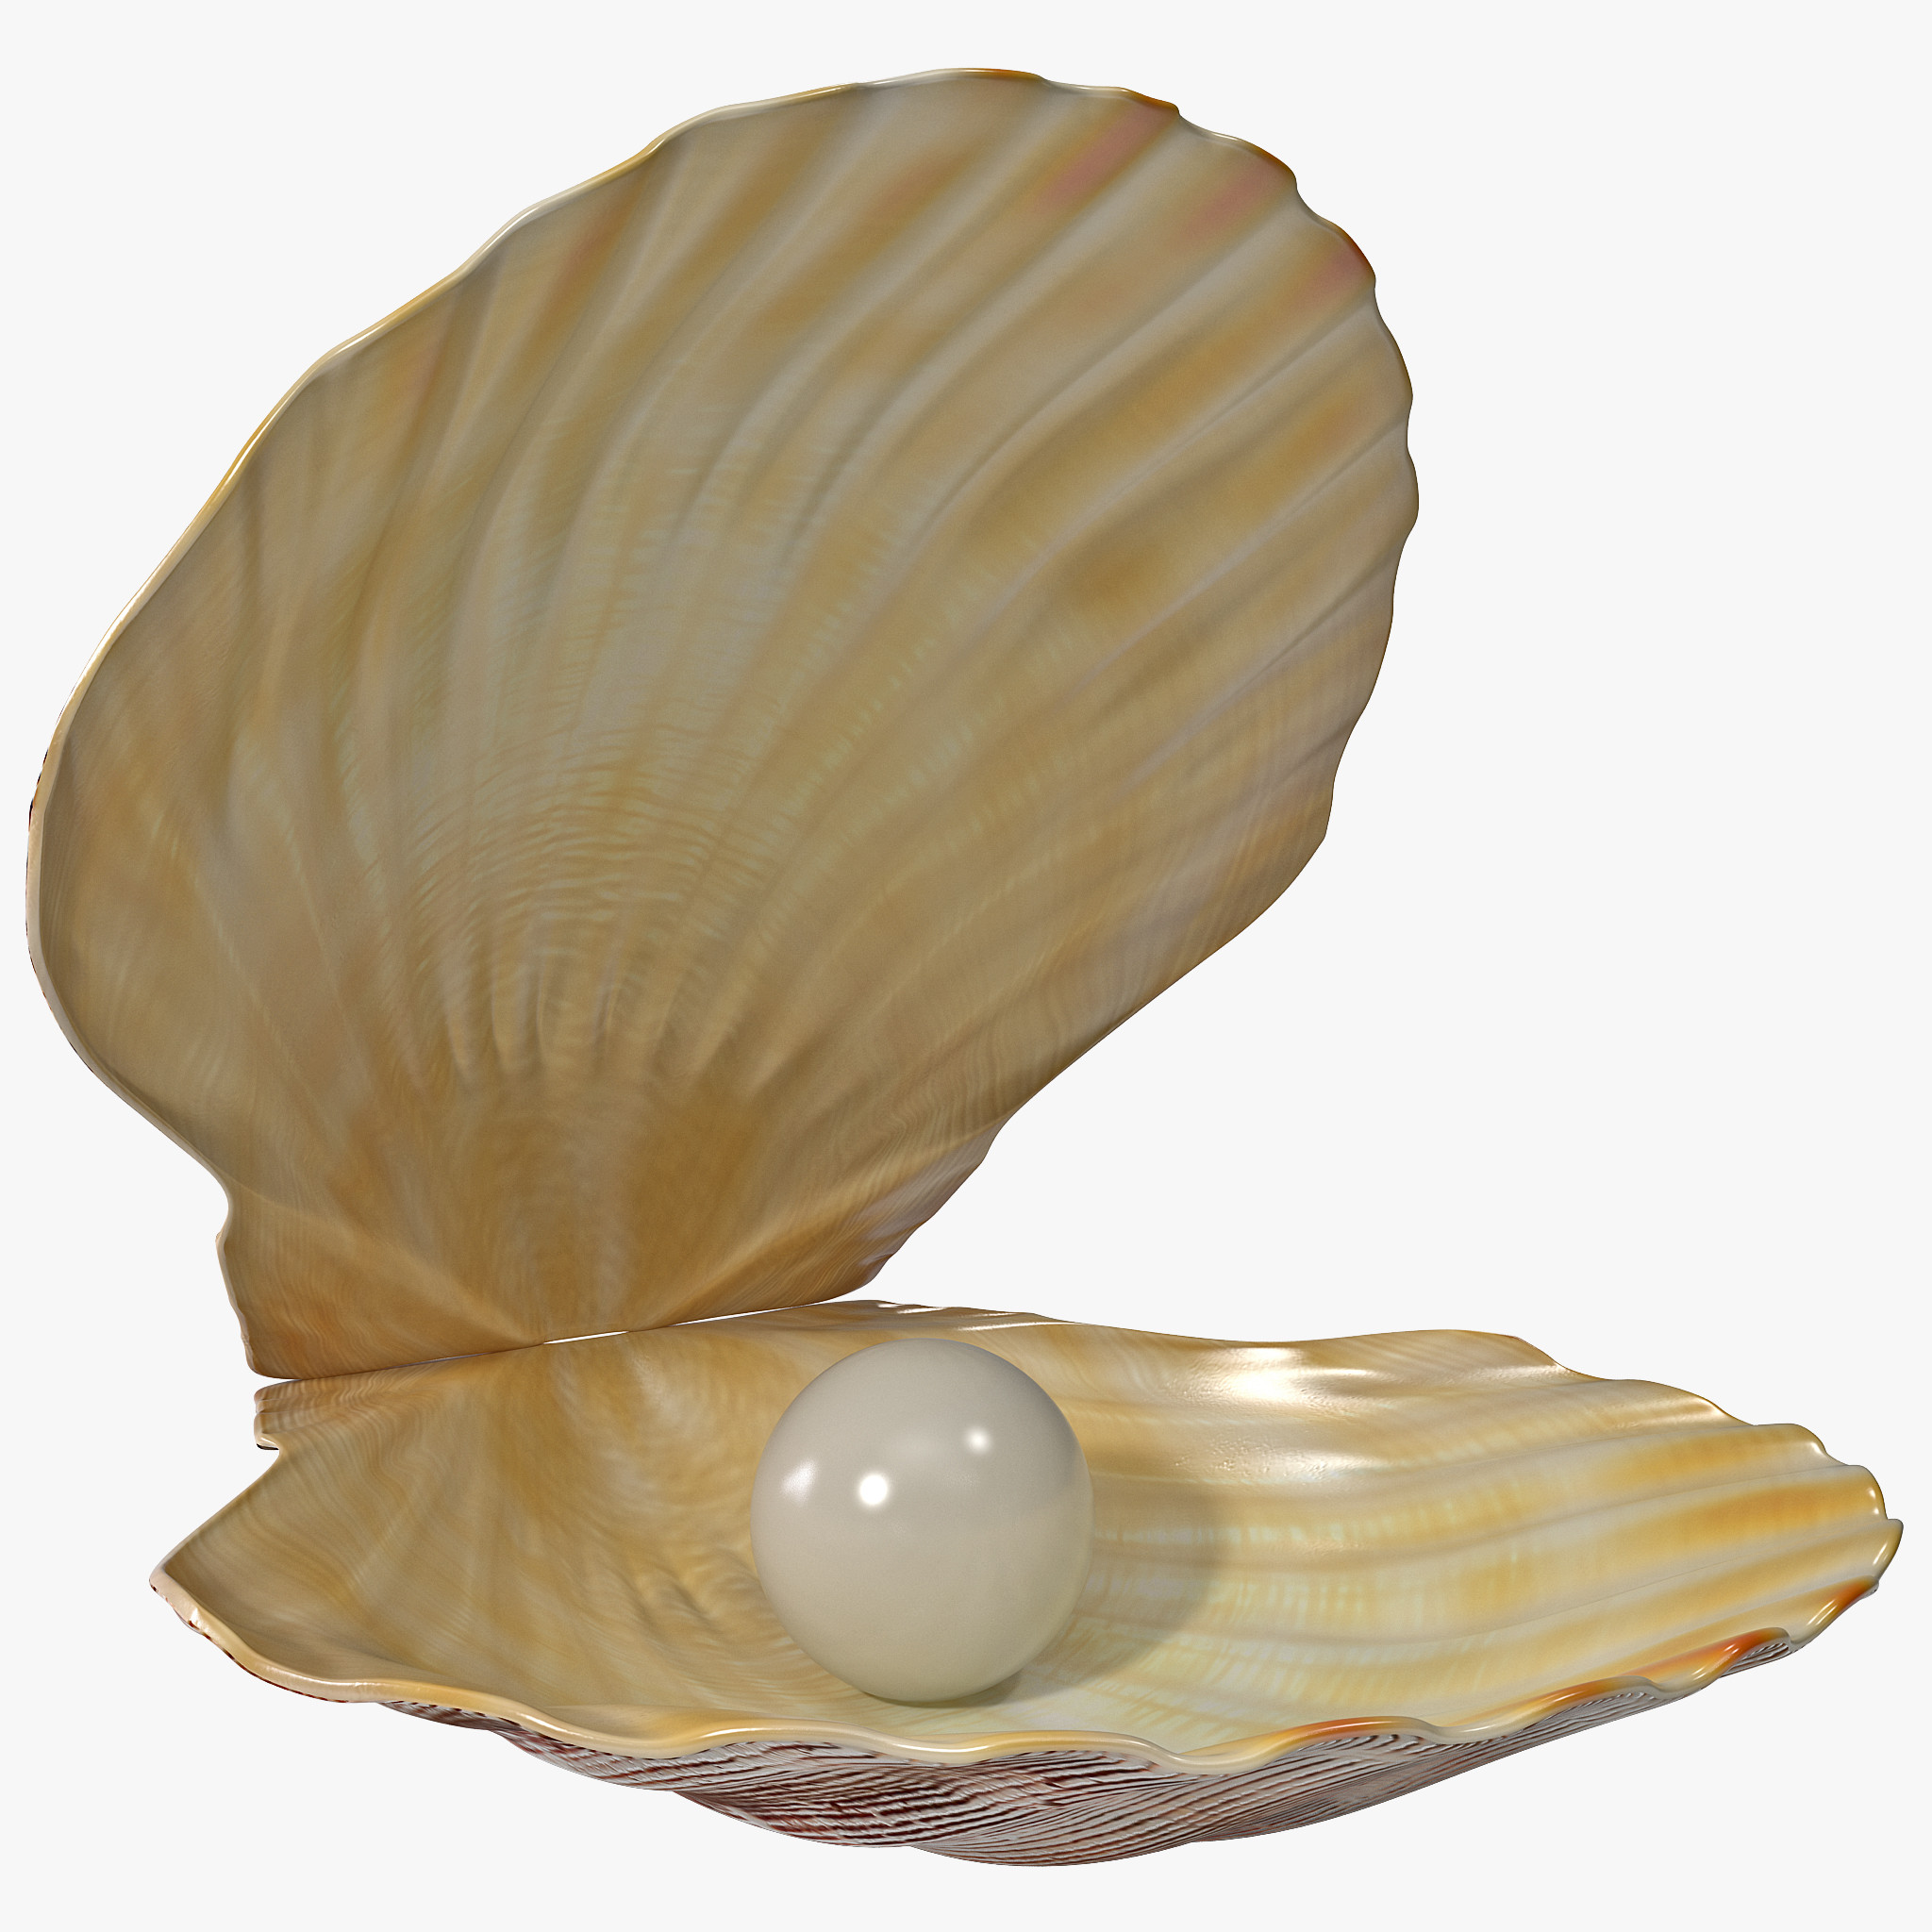 Open Oyster PNG-PlusPNG.com-7